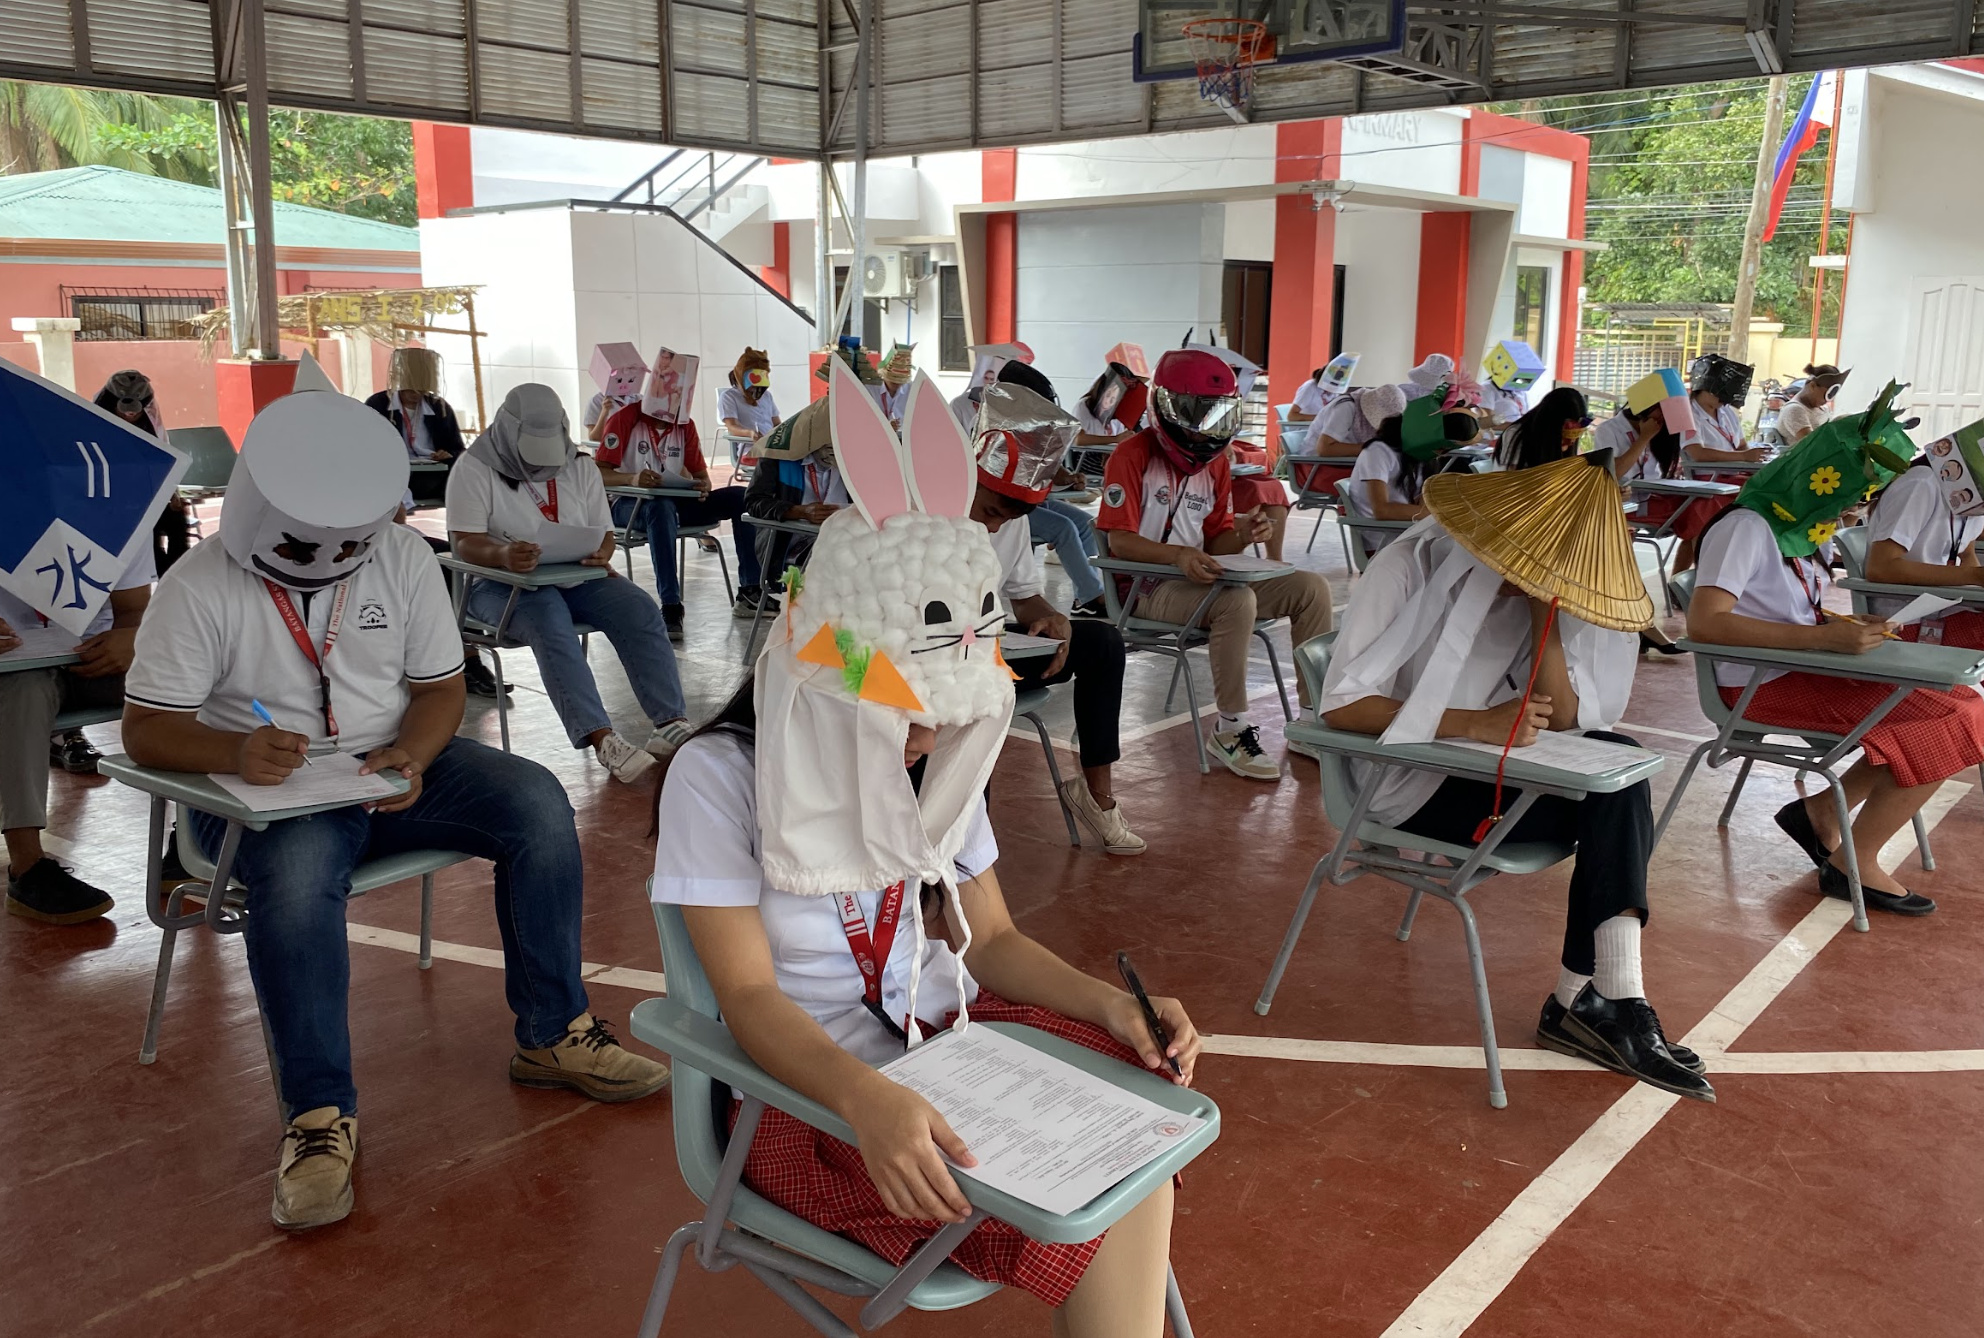 Students wearing various handmade masks seated at desks outdoors during an event